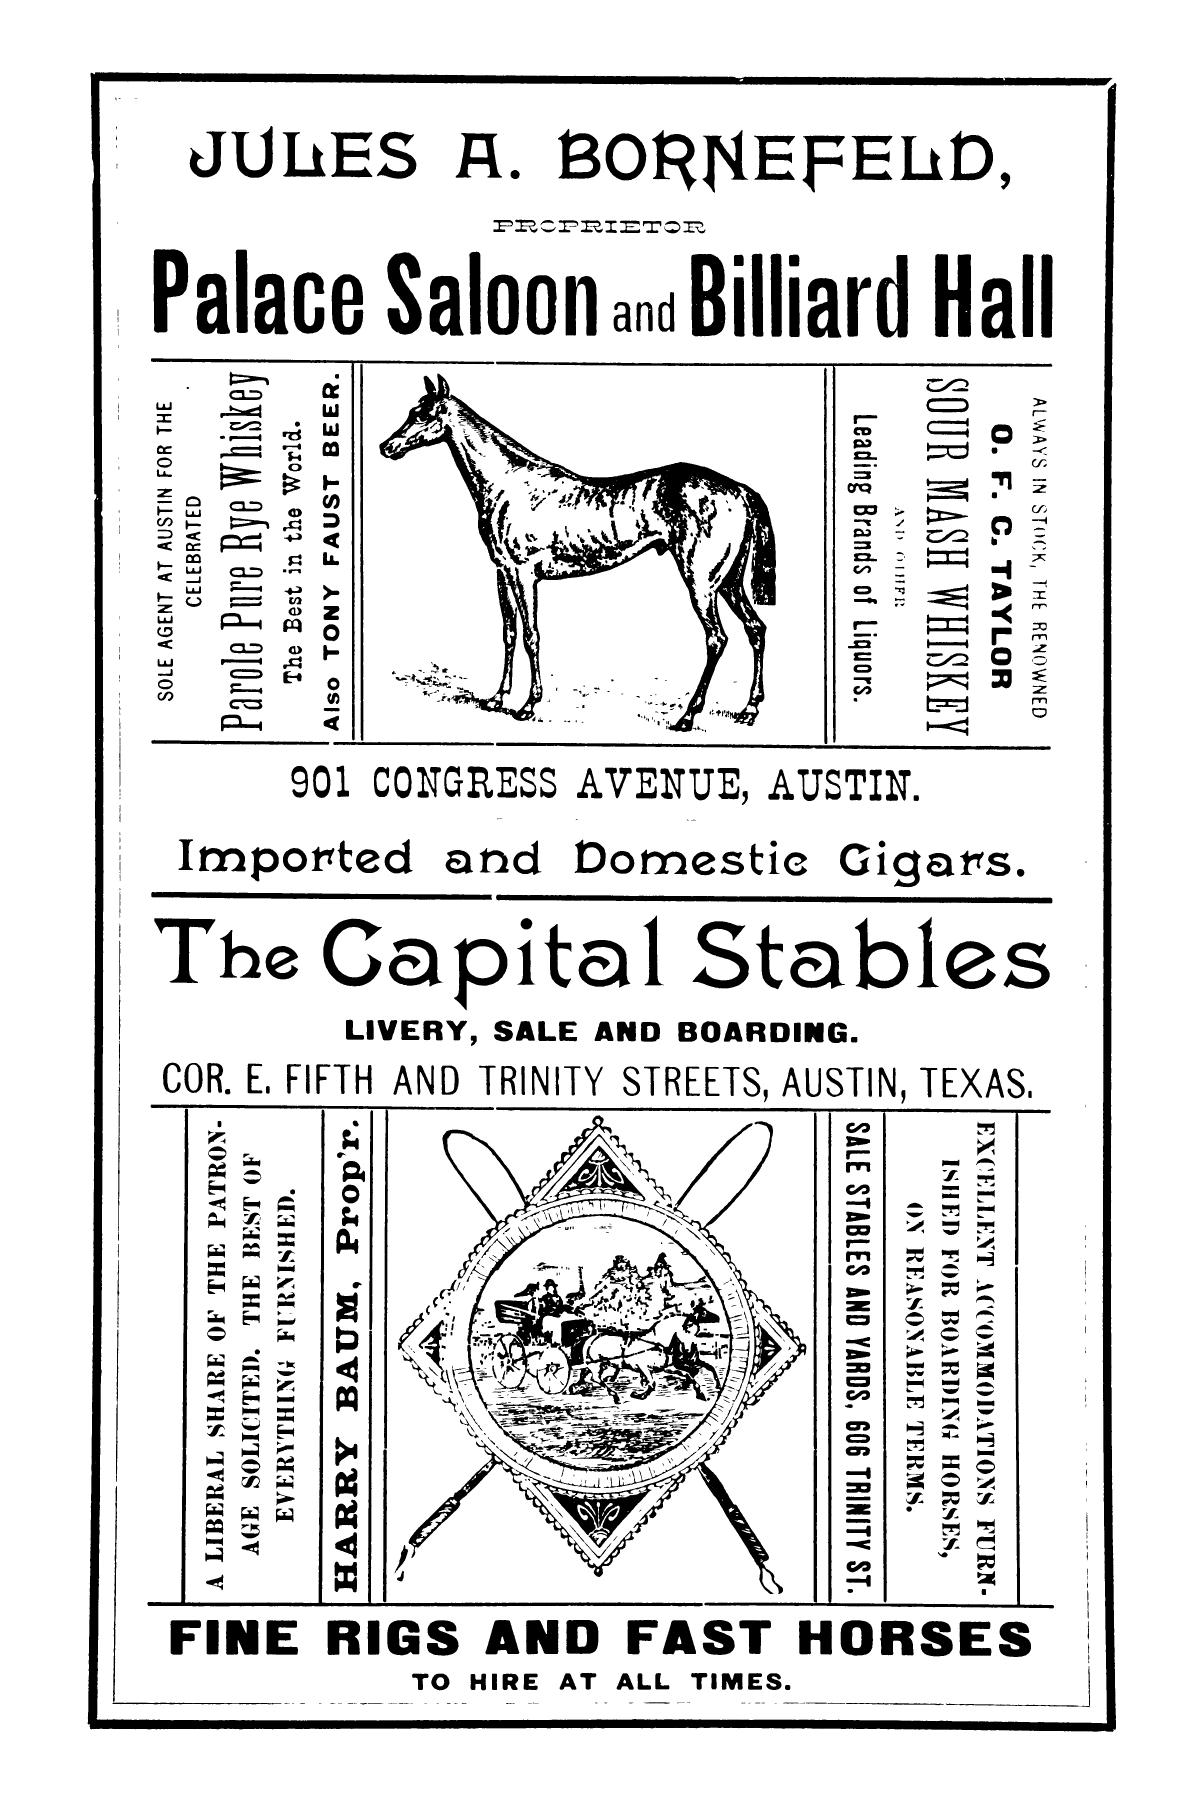 Morrison & Fourmy's General Directory of the City of Austin for 1889-1890
                                                
                                                    3
                                                